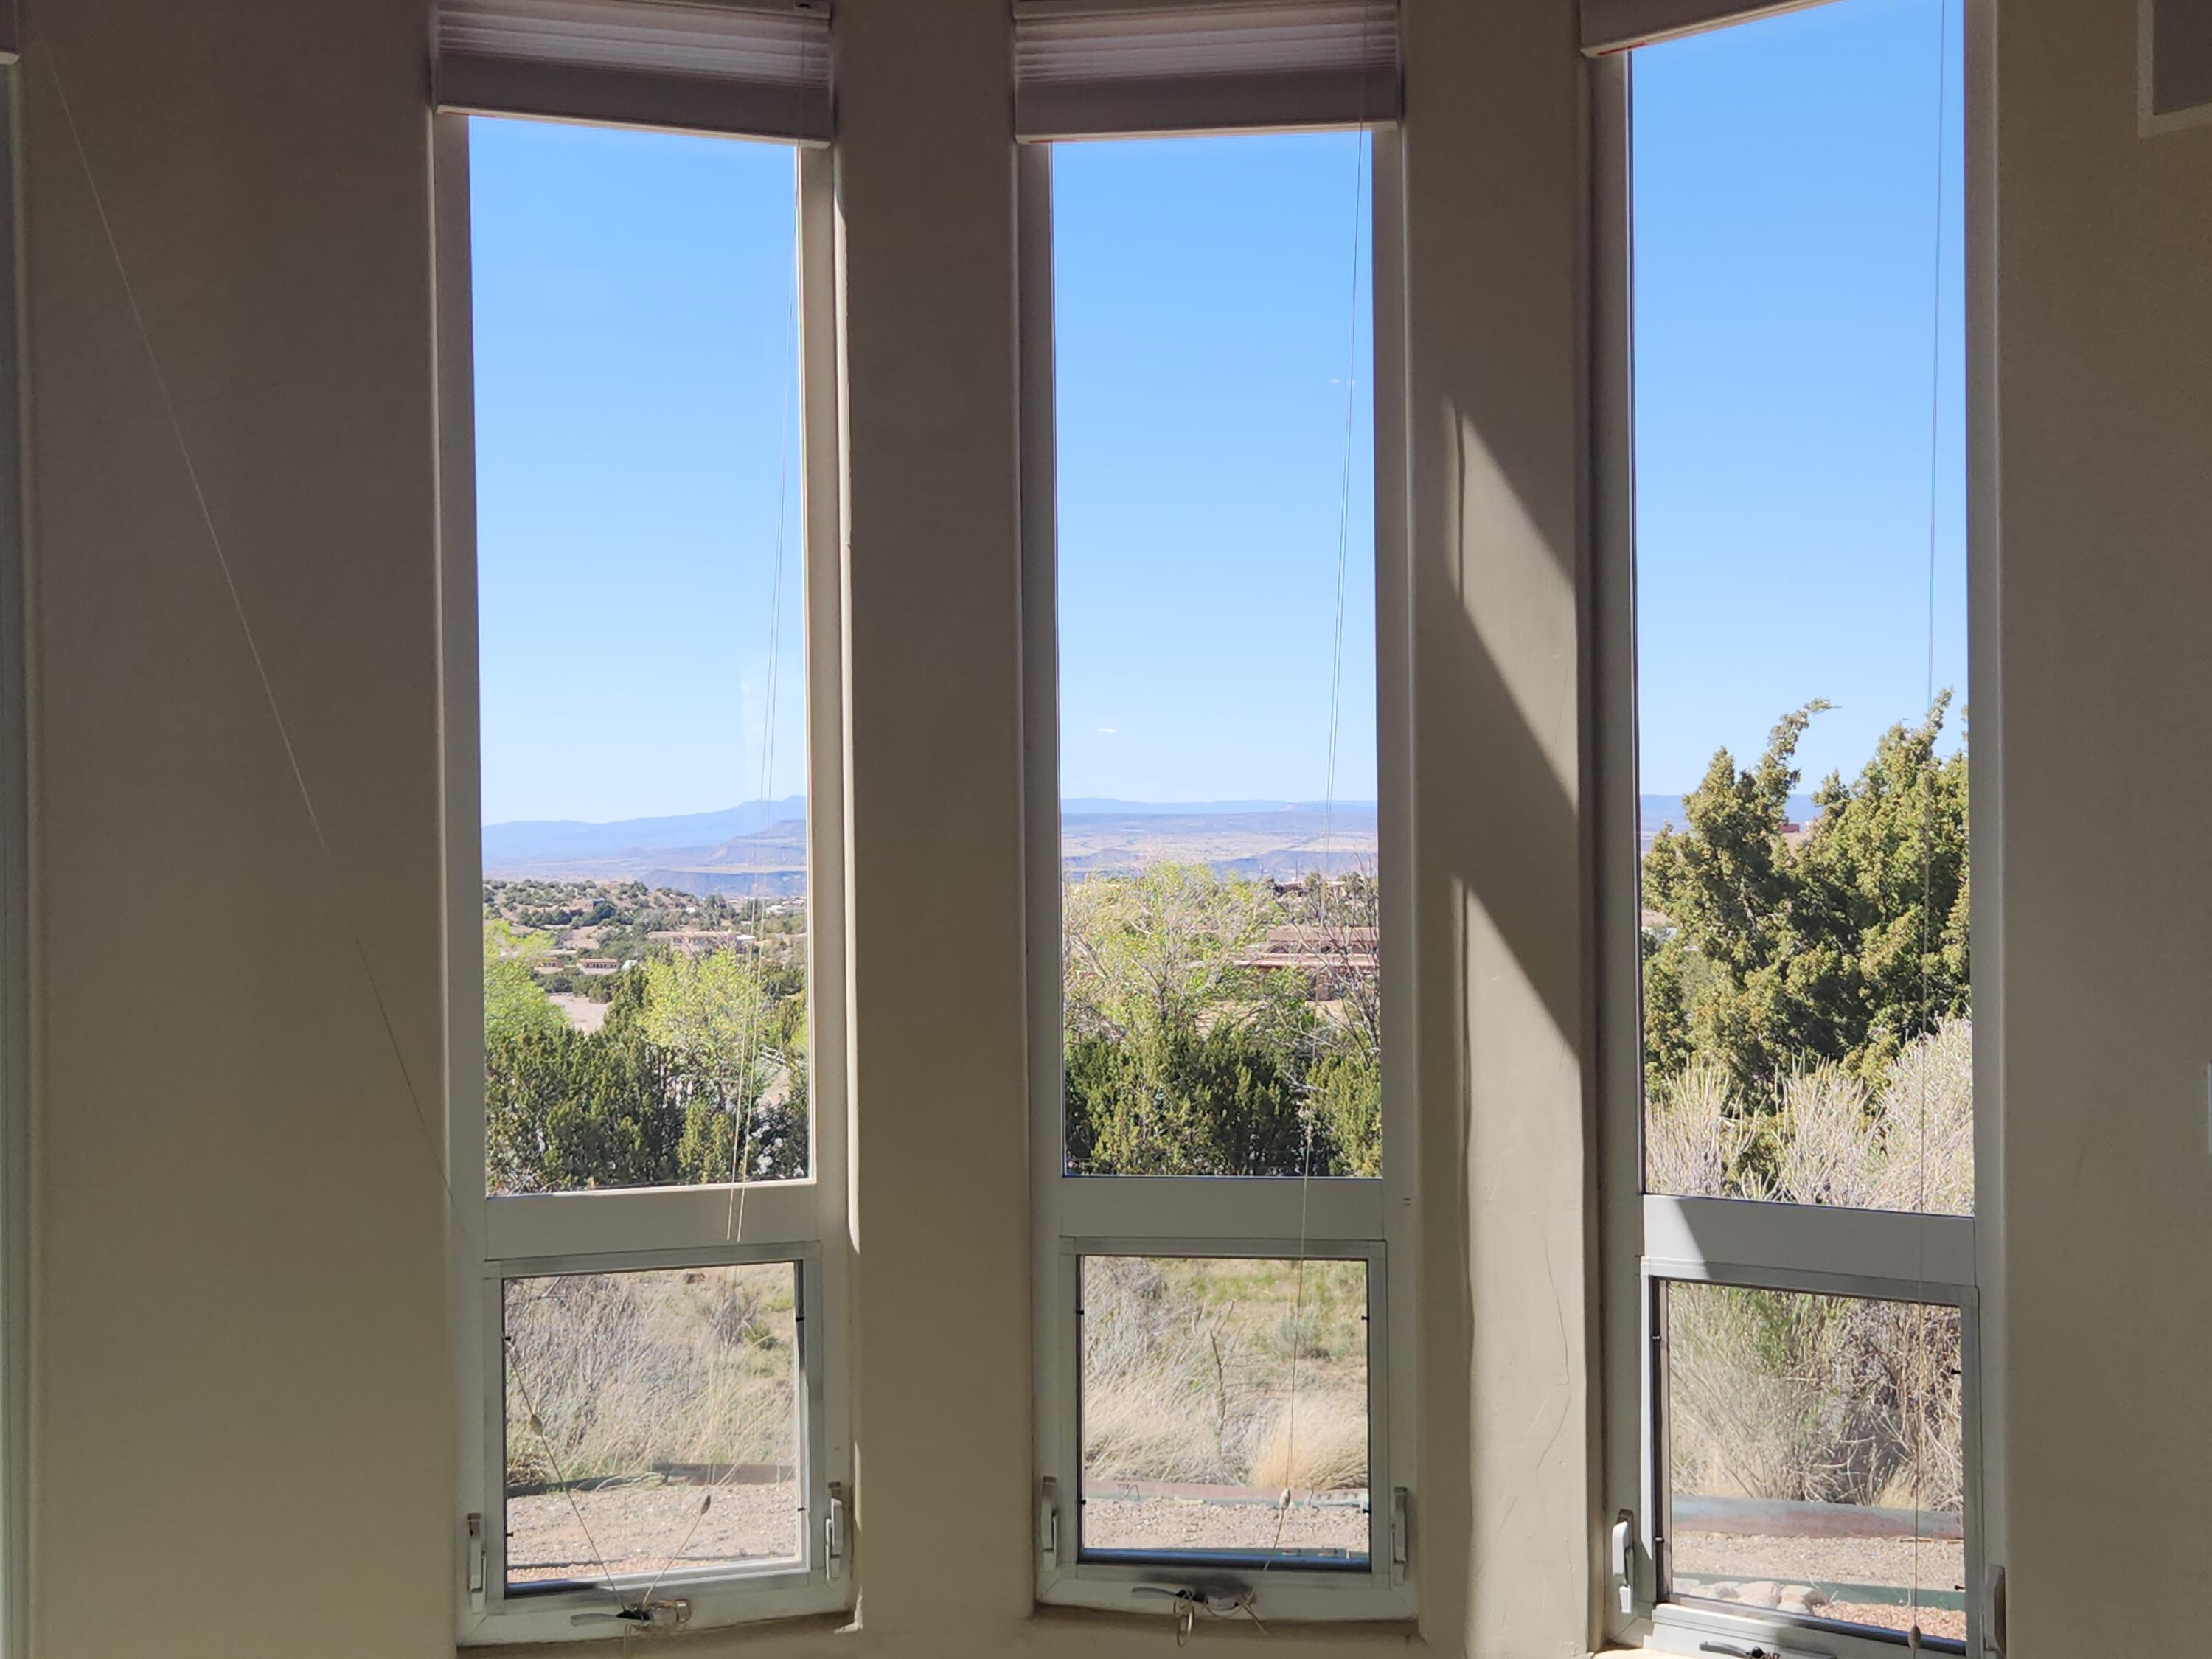 2 Hillside Drive, Placitas, New Mexico 87043, 4 Bedrooms Bedrooms, ,3 BathroomsBathrooms,Residential,For Sale,2 Hillside Drive,1060948